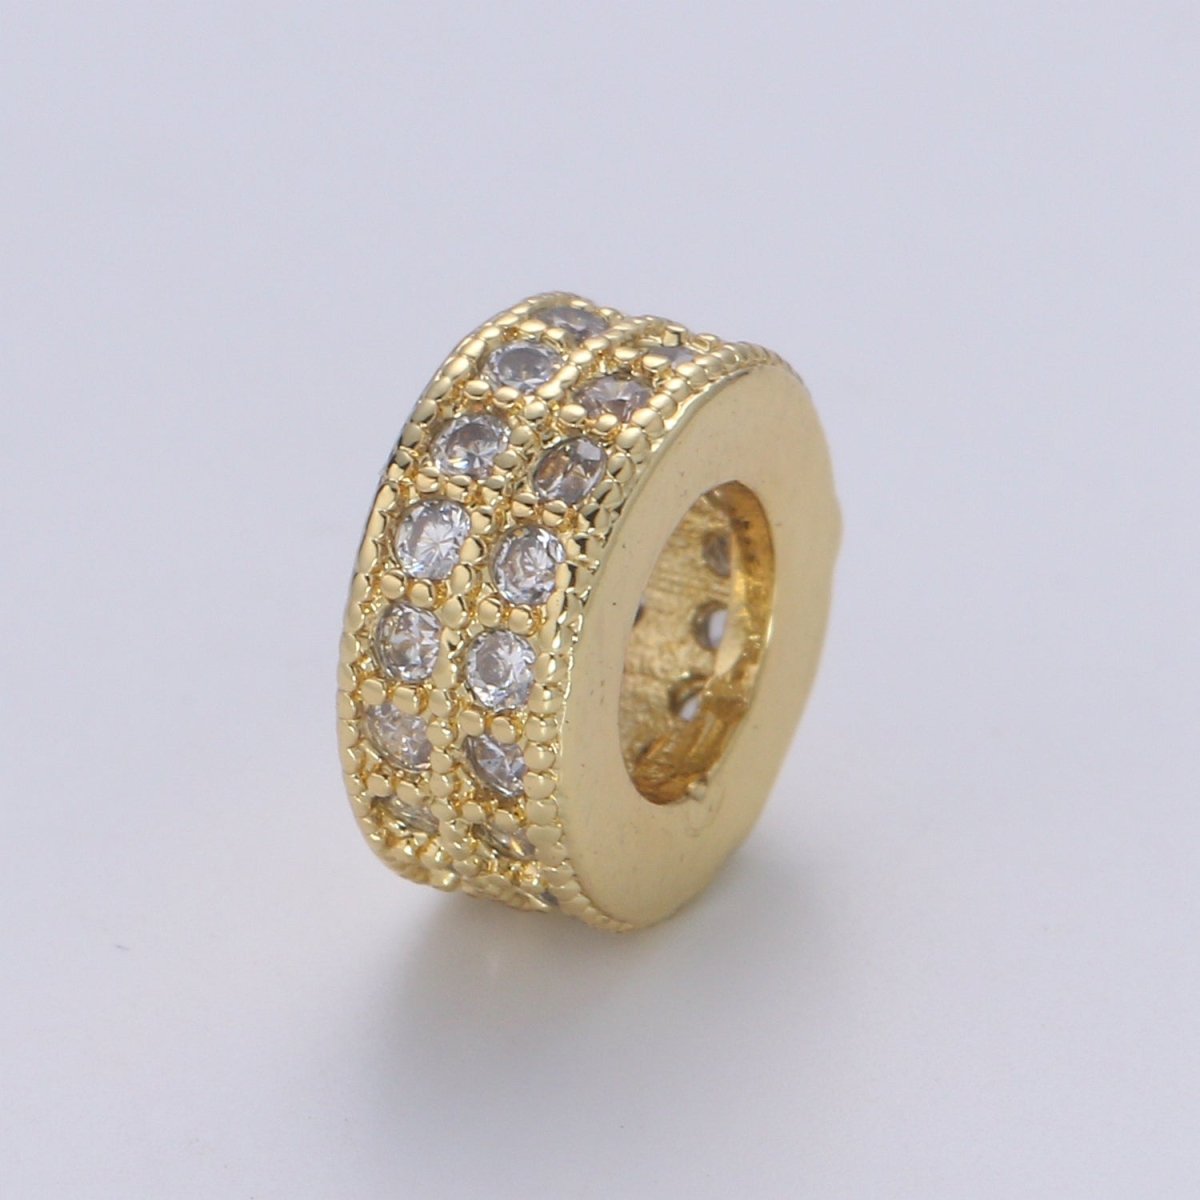 14K Gold Filled CZ Micro Pave Round Wheel Spacer Beads, Cubic Zirconia Rondelle Spacer Bead for Bracelet Necklace B-694 B-695 - DLUXCA